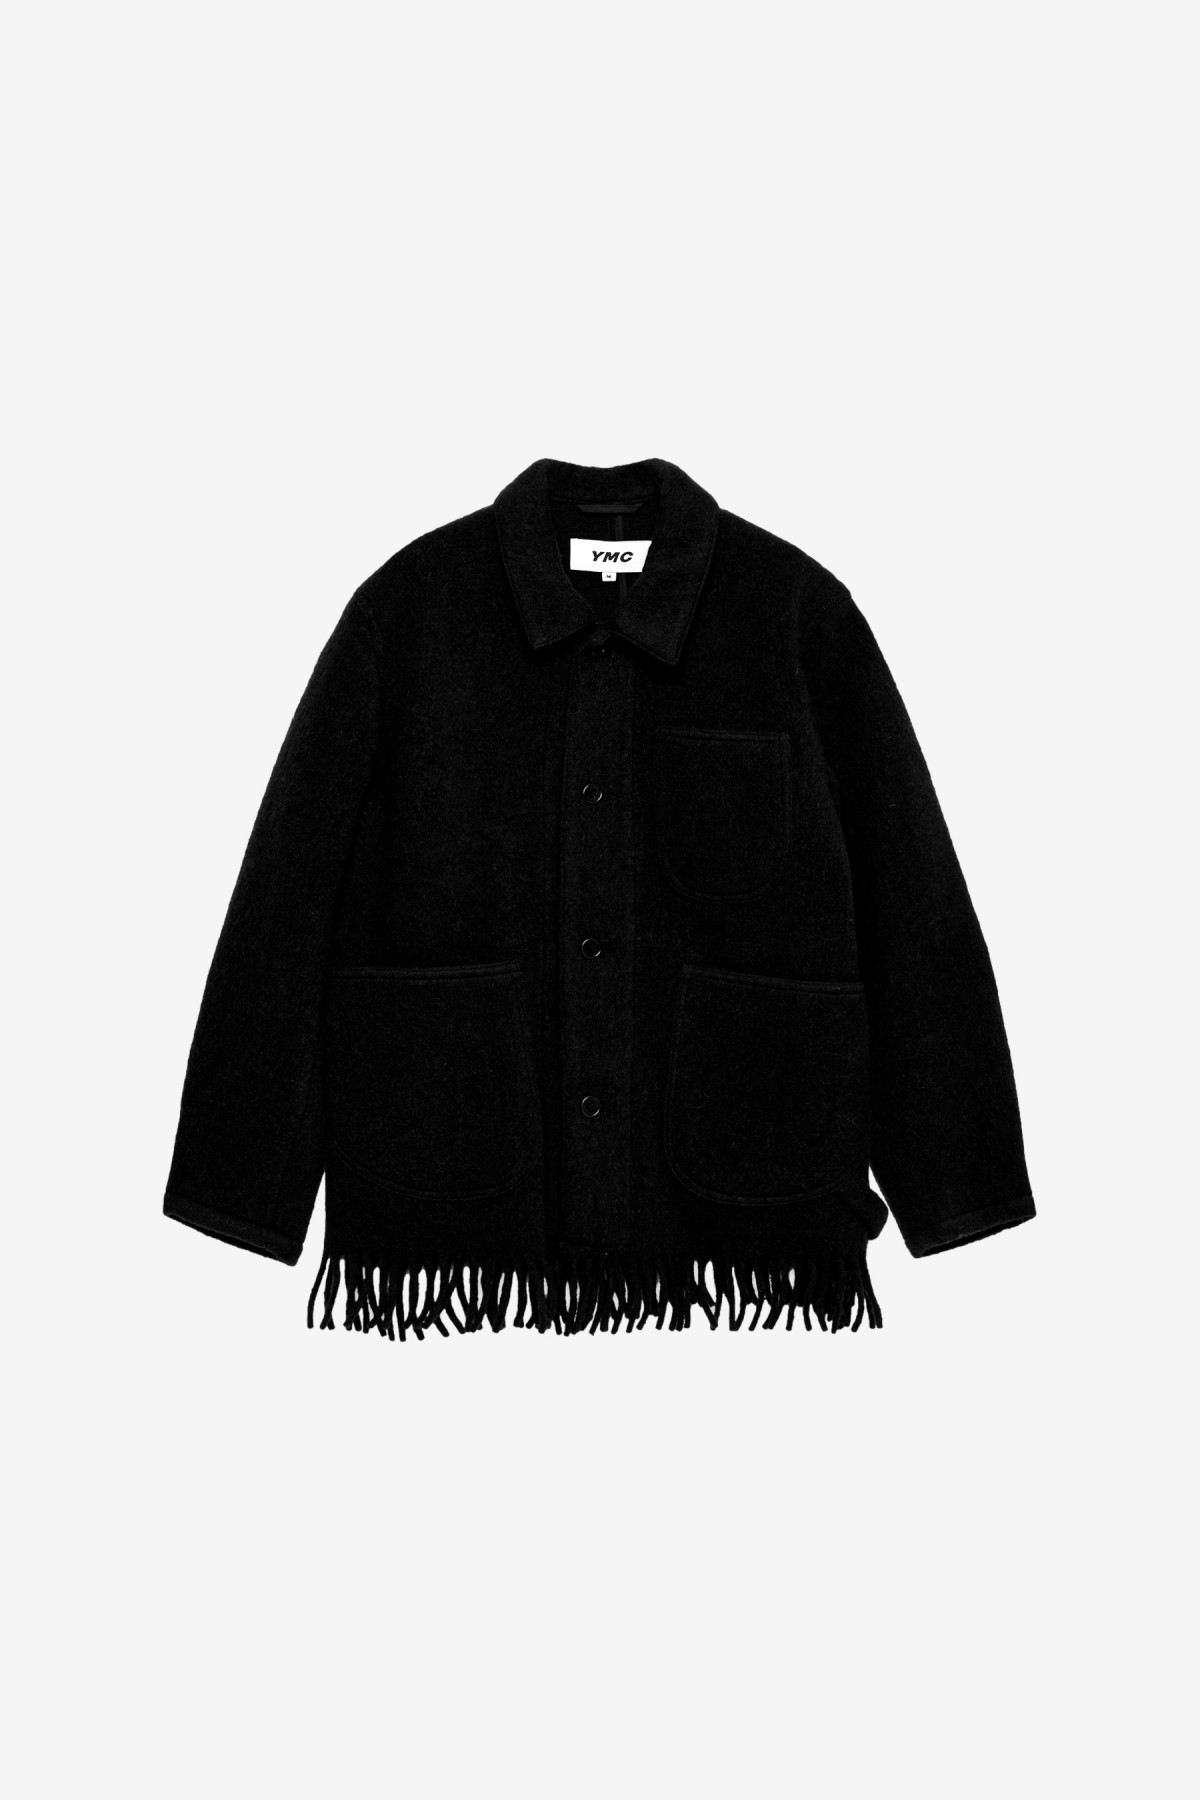 YMC You Must Create Labour Chore Fringed Jacket in Black